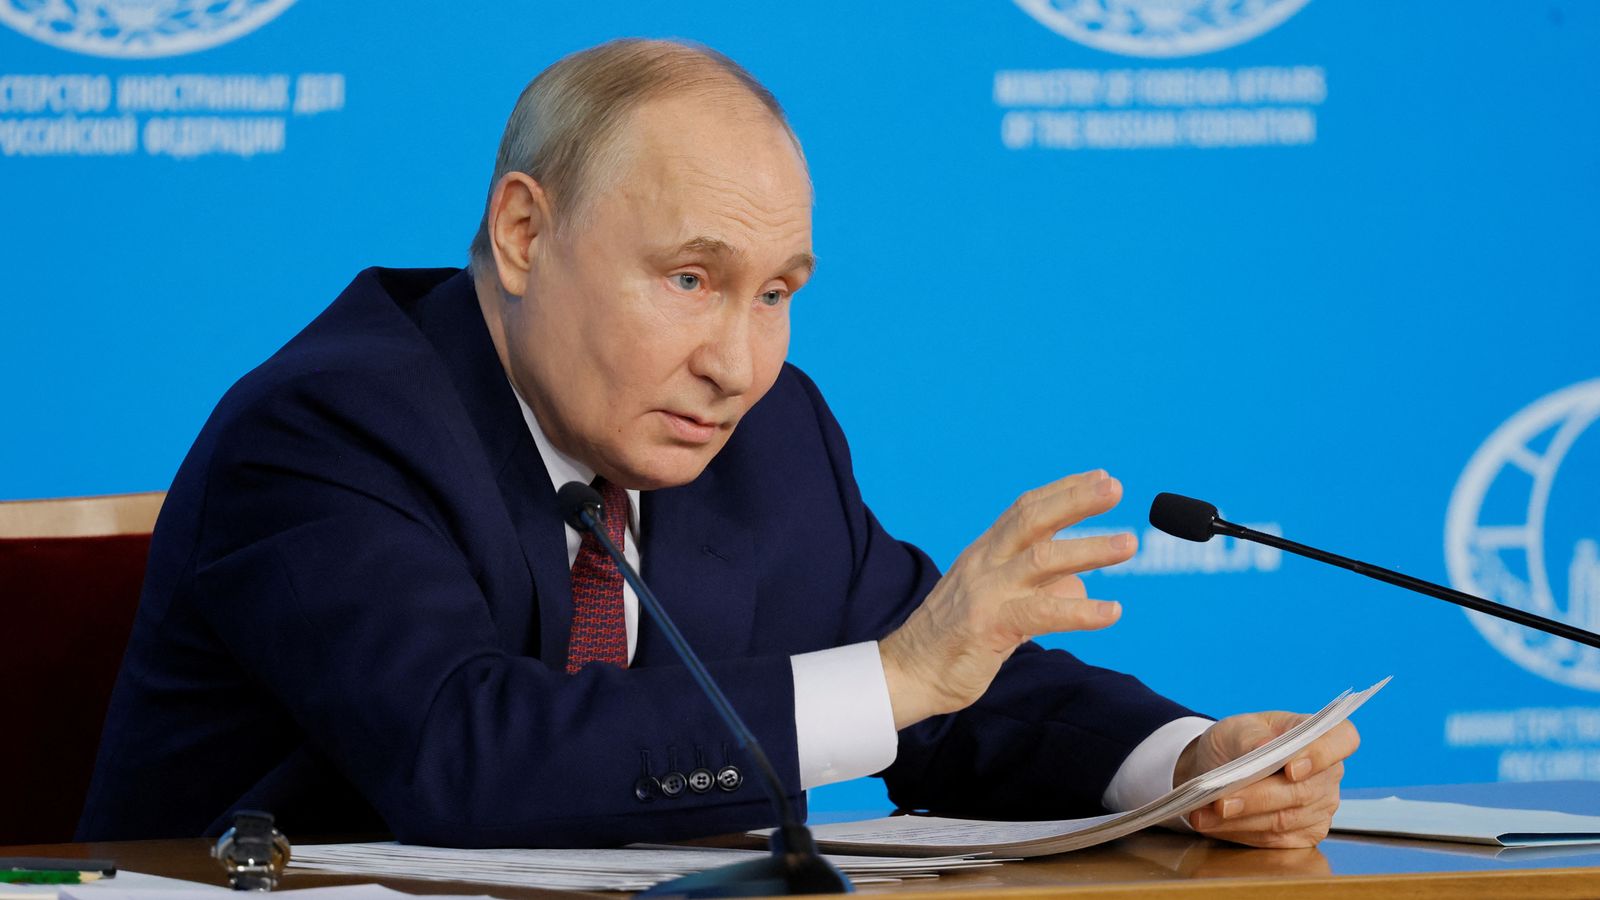 Putin knew Ukraine would reject his ceasefire offer – where will the escalation end?